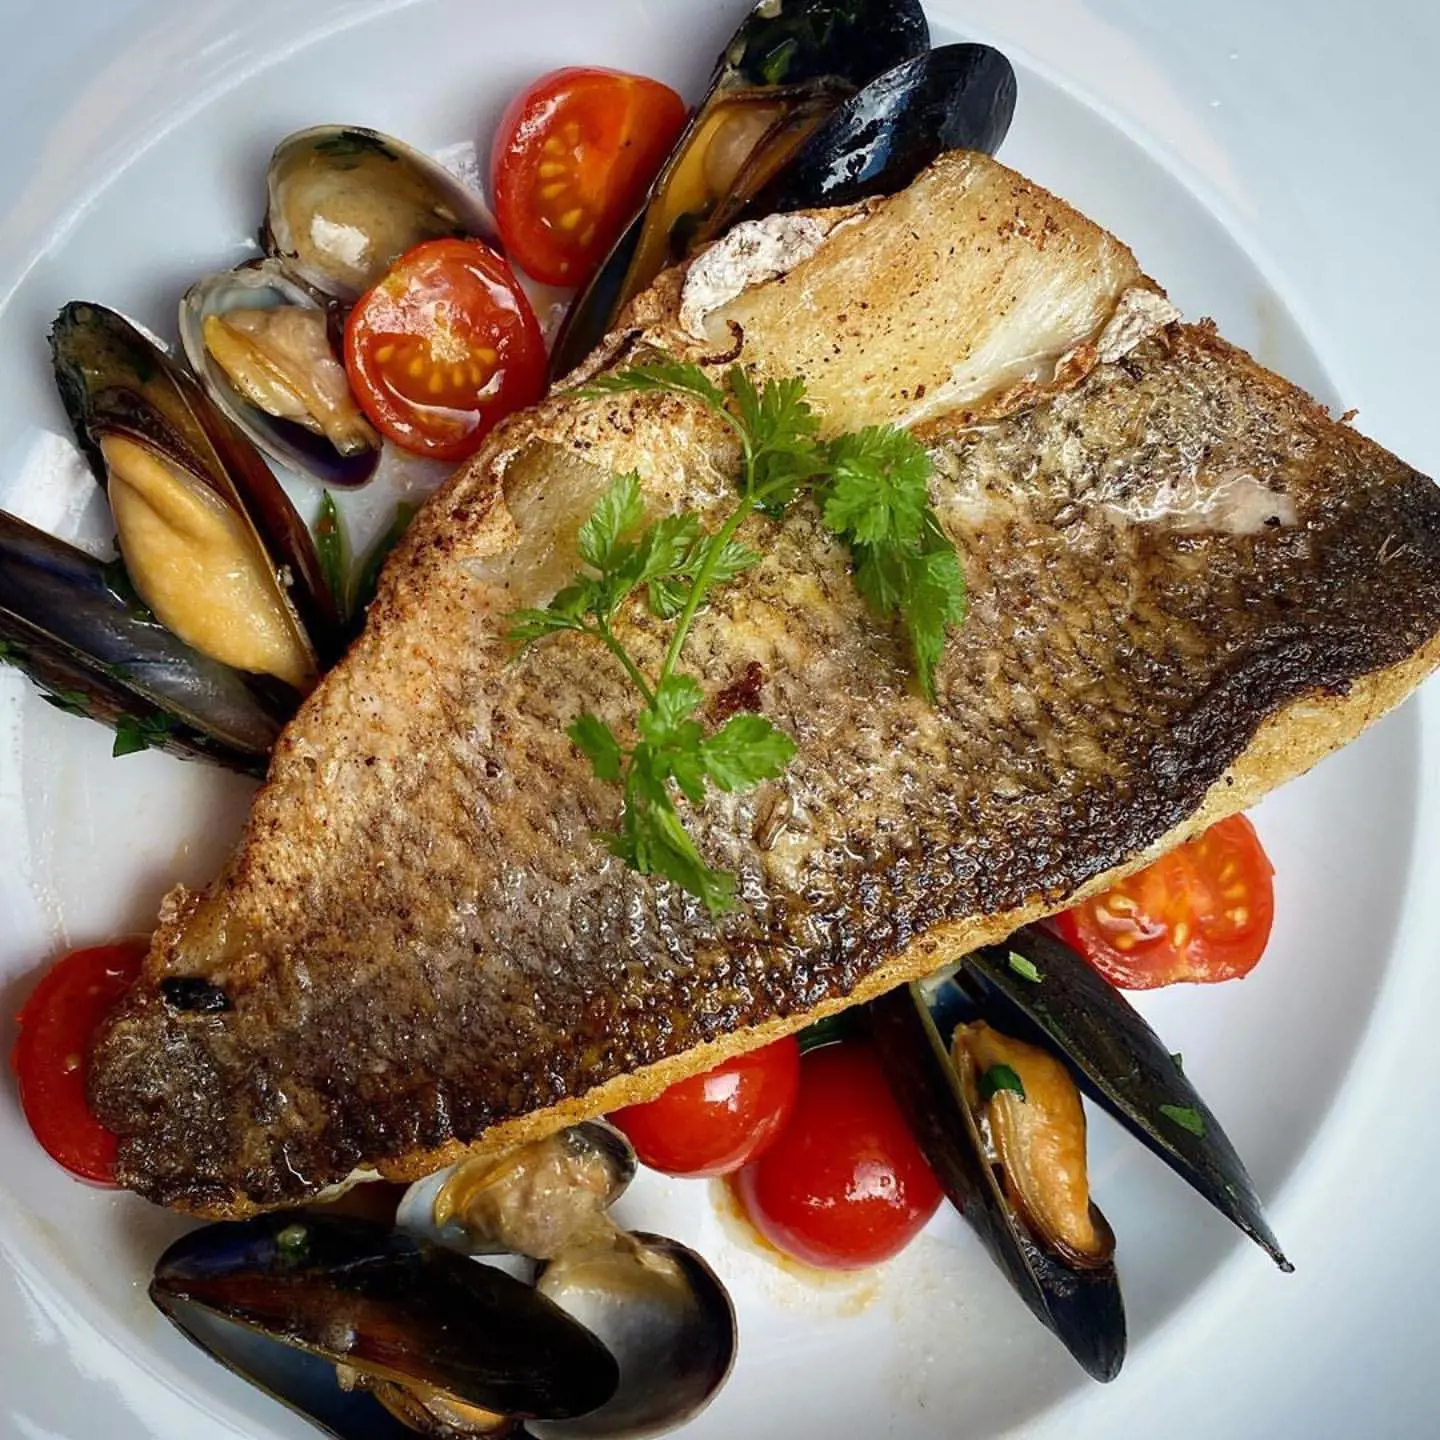 Pan-fried sea bass served with spinach and sautéed cherry tomatoes mussels & clams